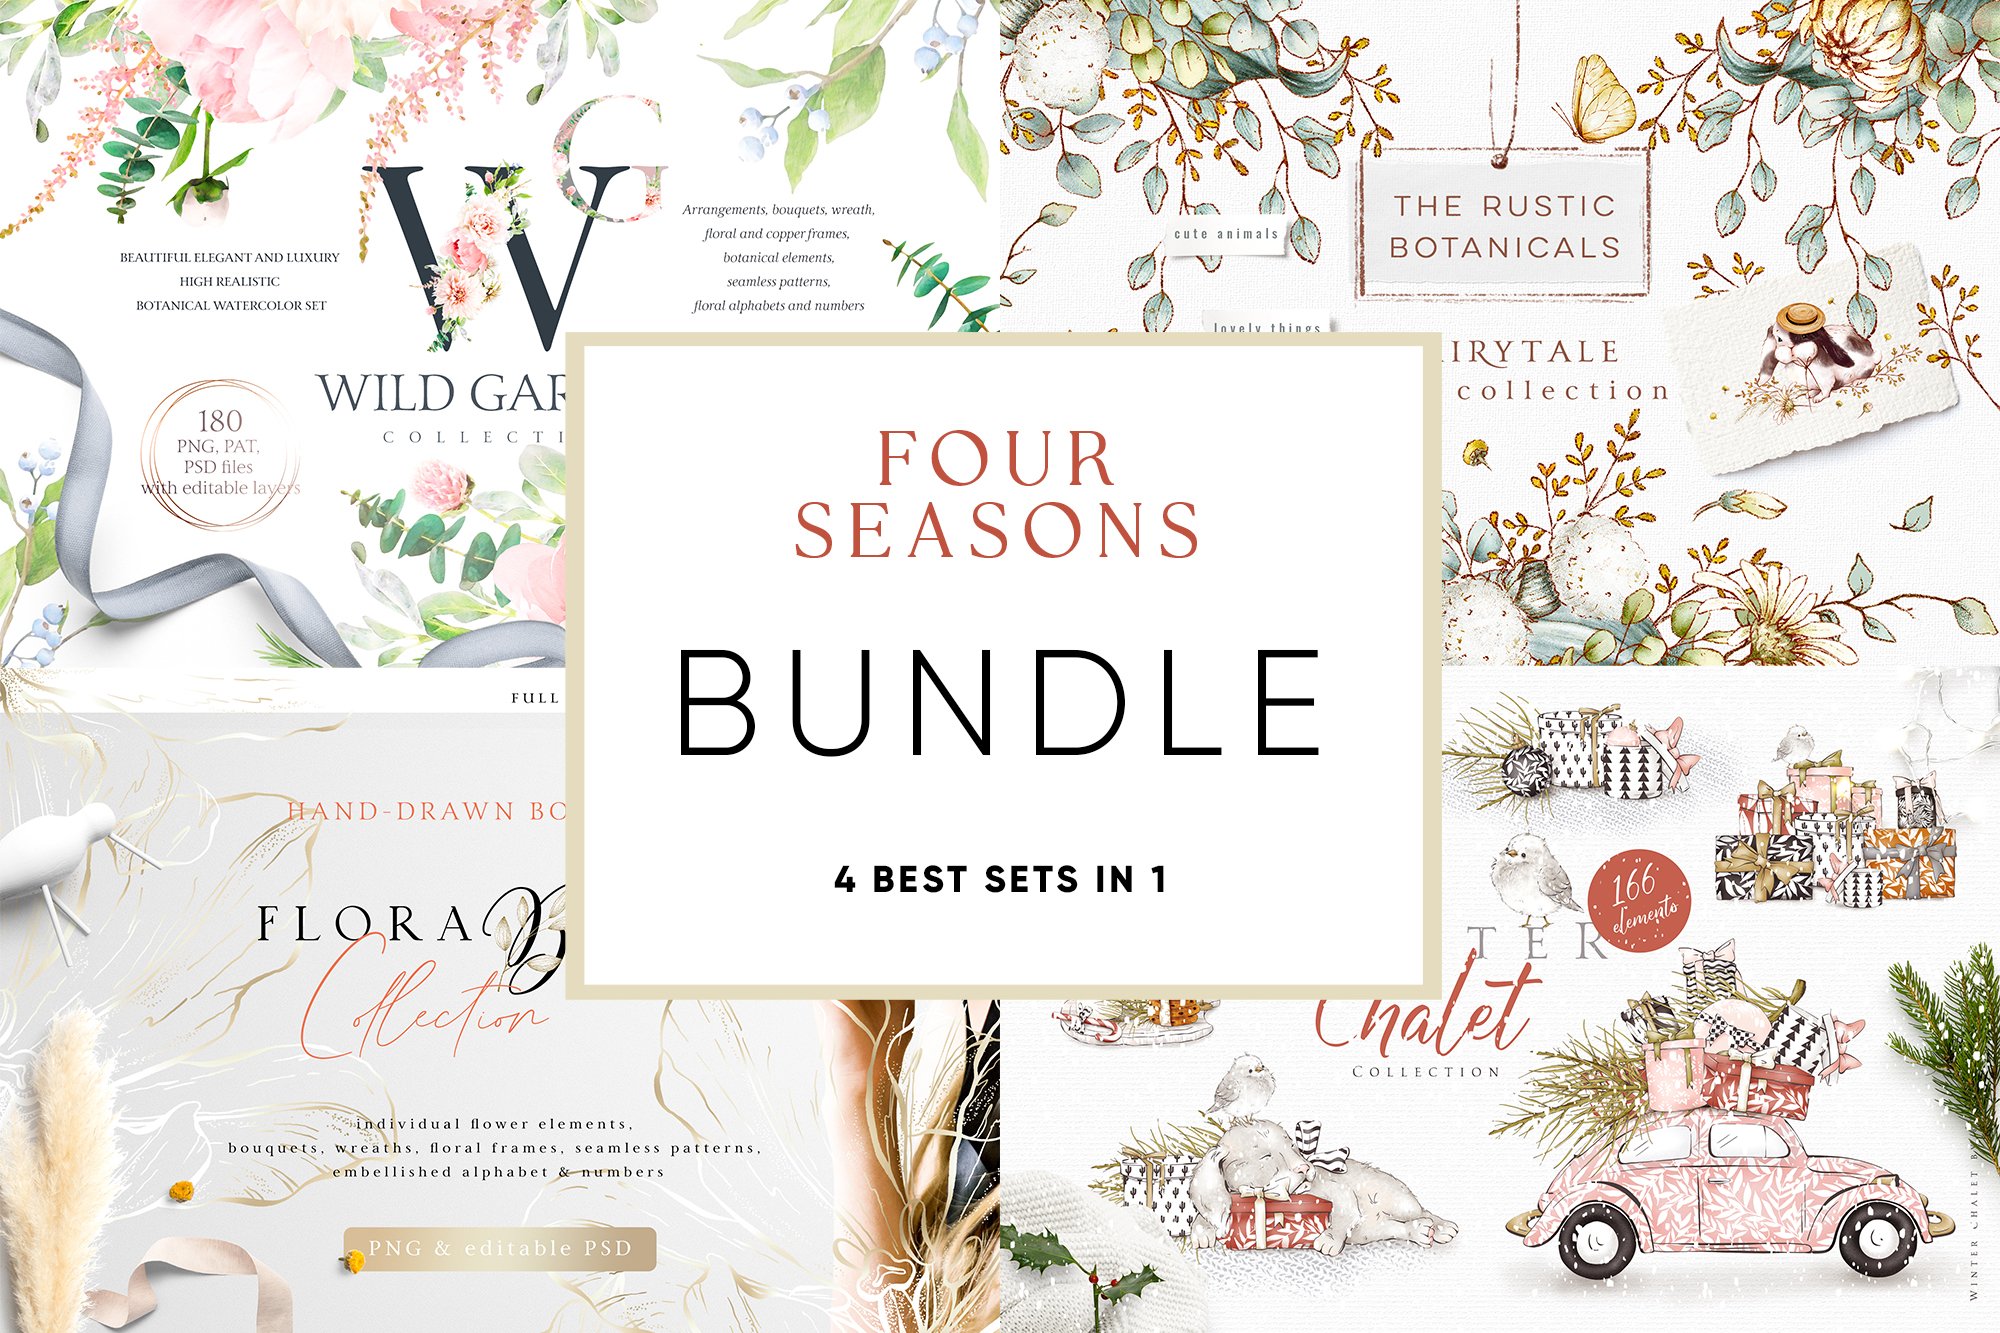 This set is included in the Four Seasons BUNDLE.